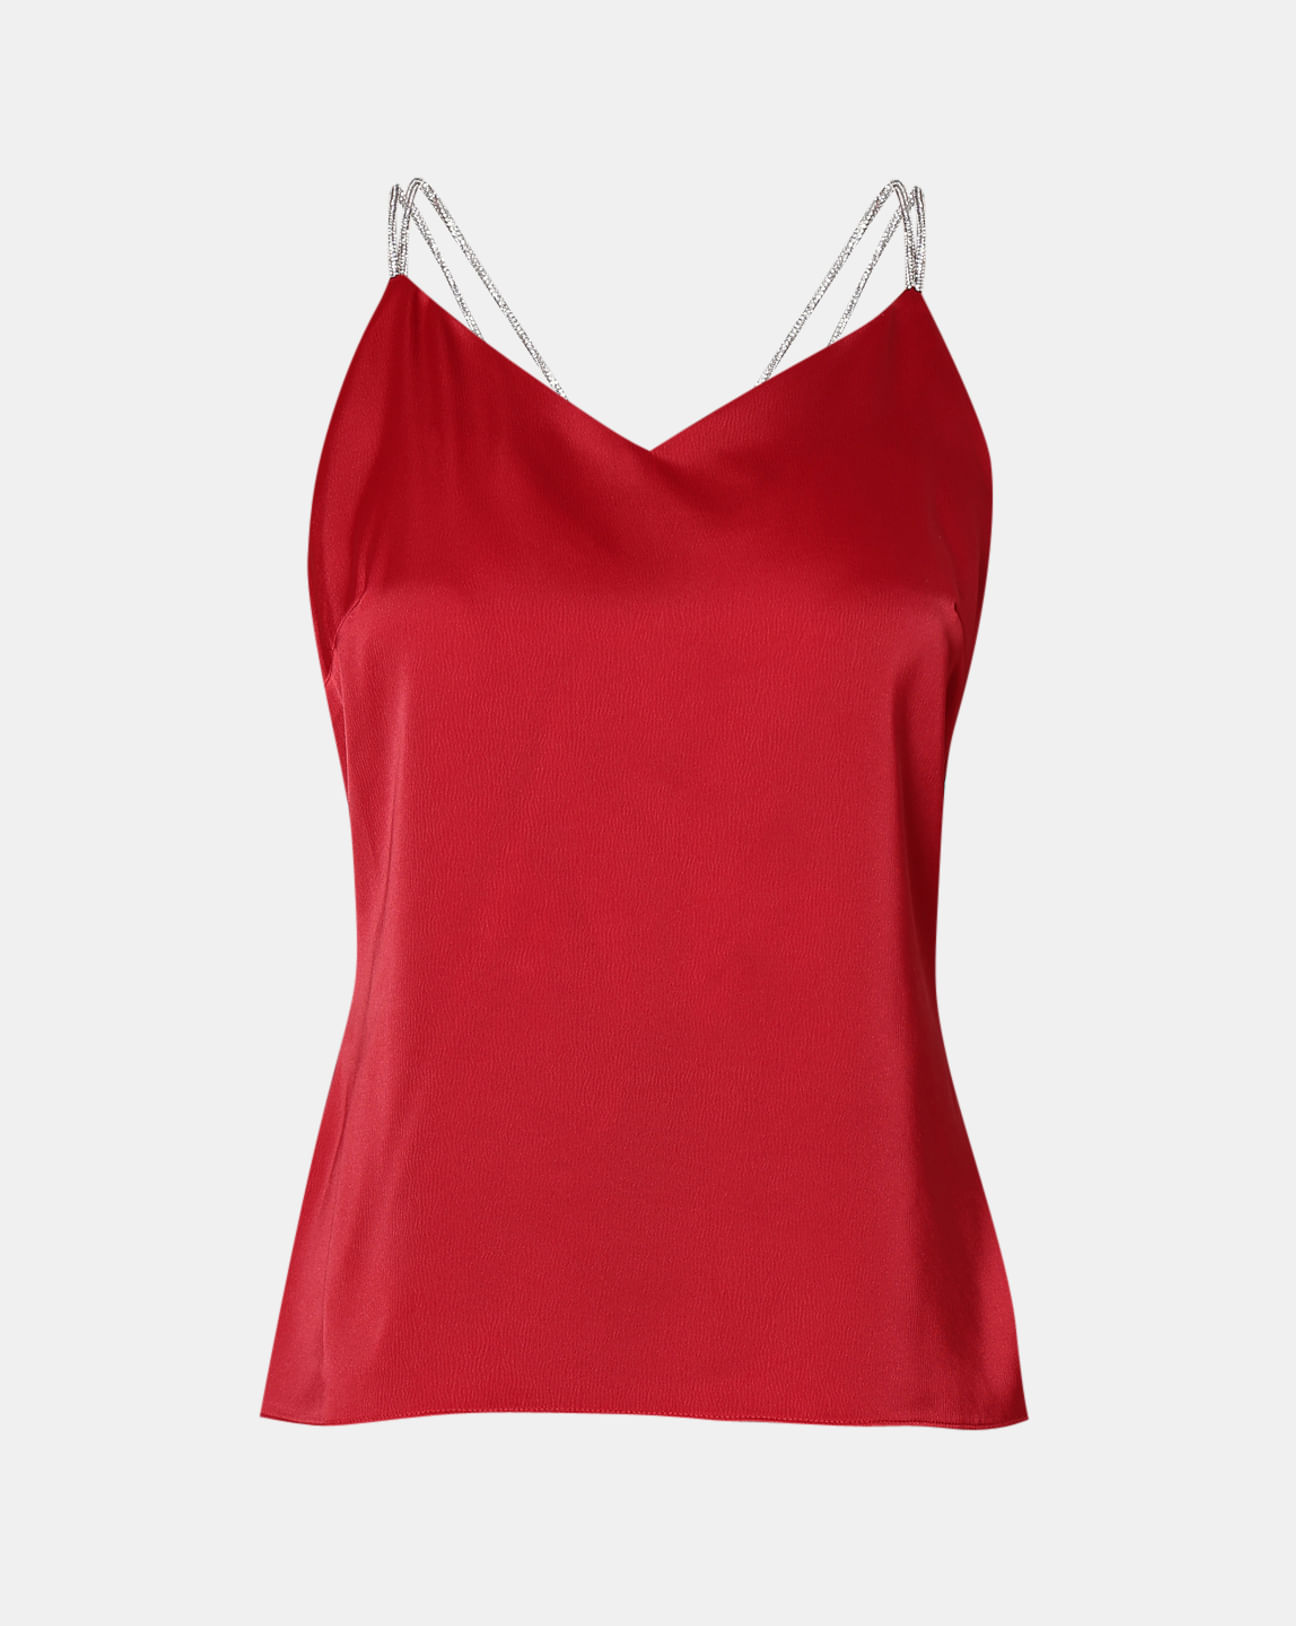 red by BKE Rhinestone Strappy Tank Top - Women's Tank Tops in Vetiver